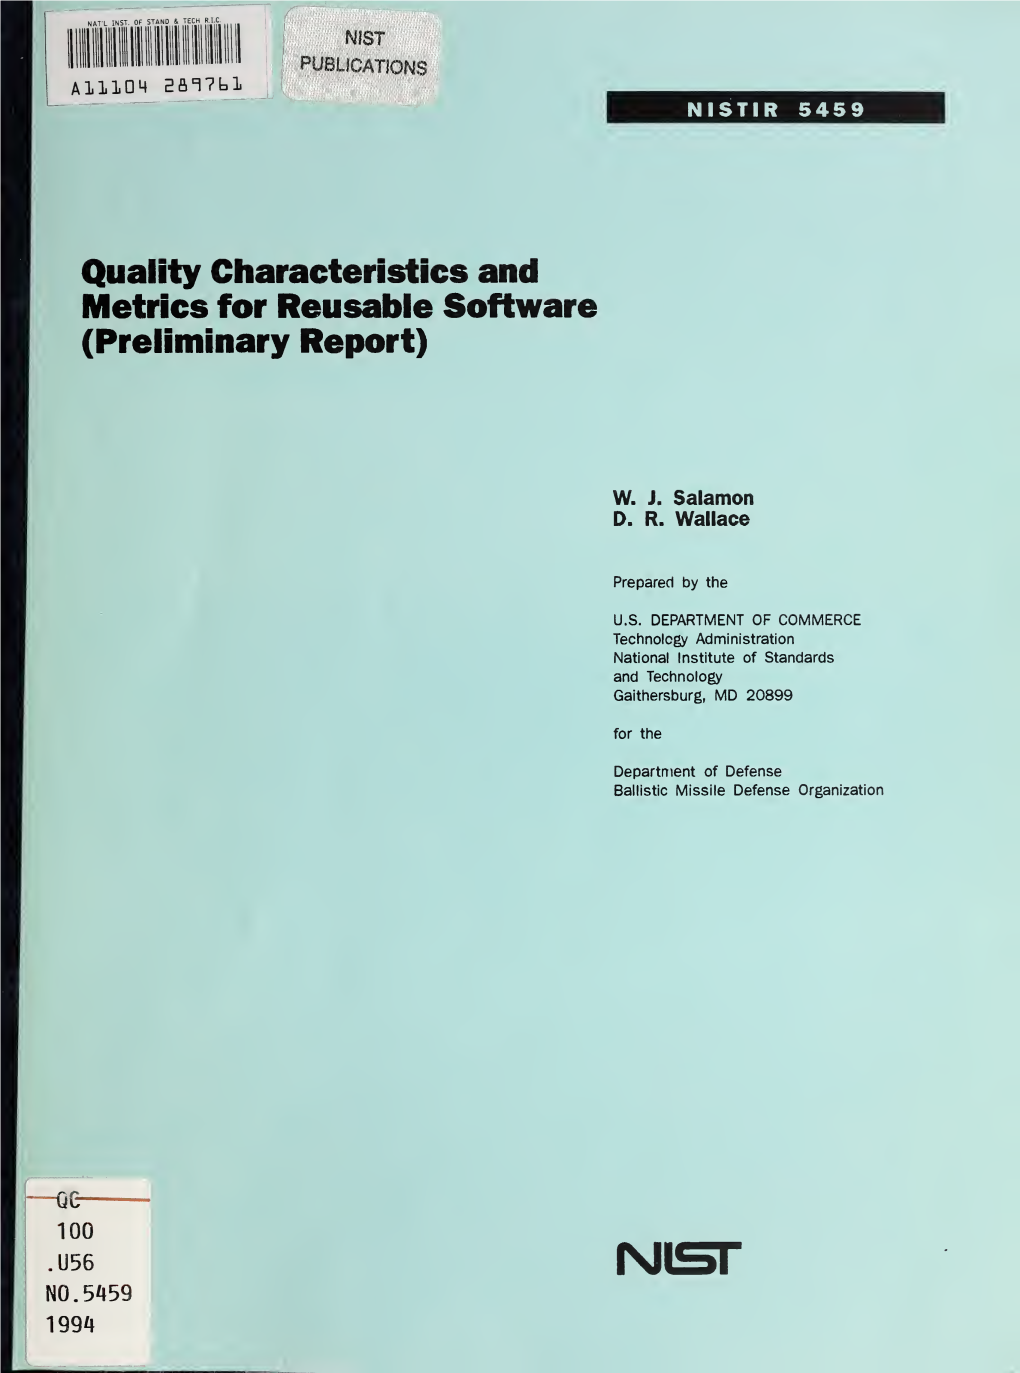 Quality Characteristics and Metrics for Reusable Software (Preliminary Report)